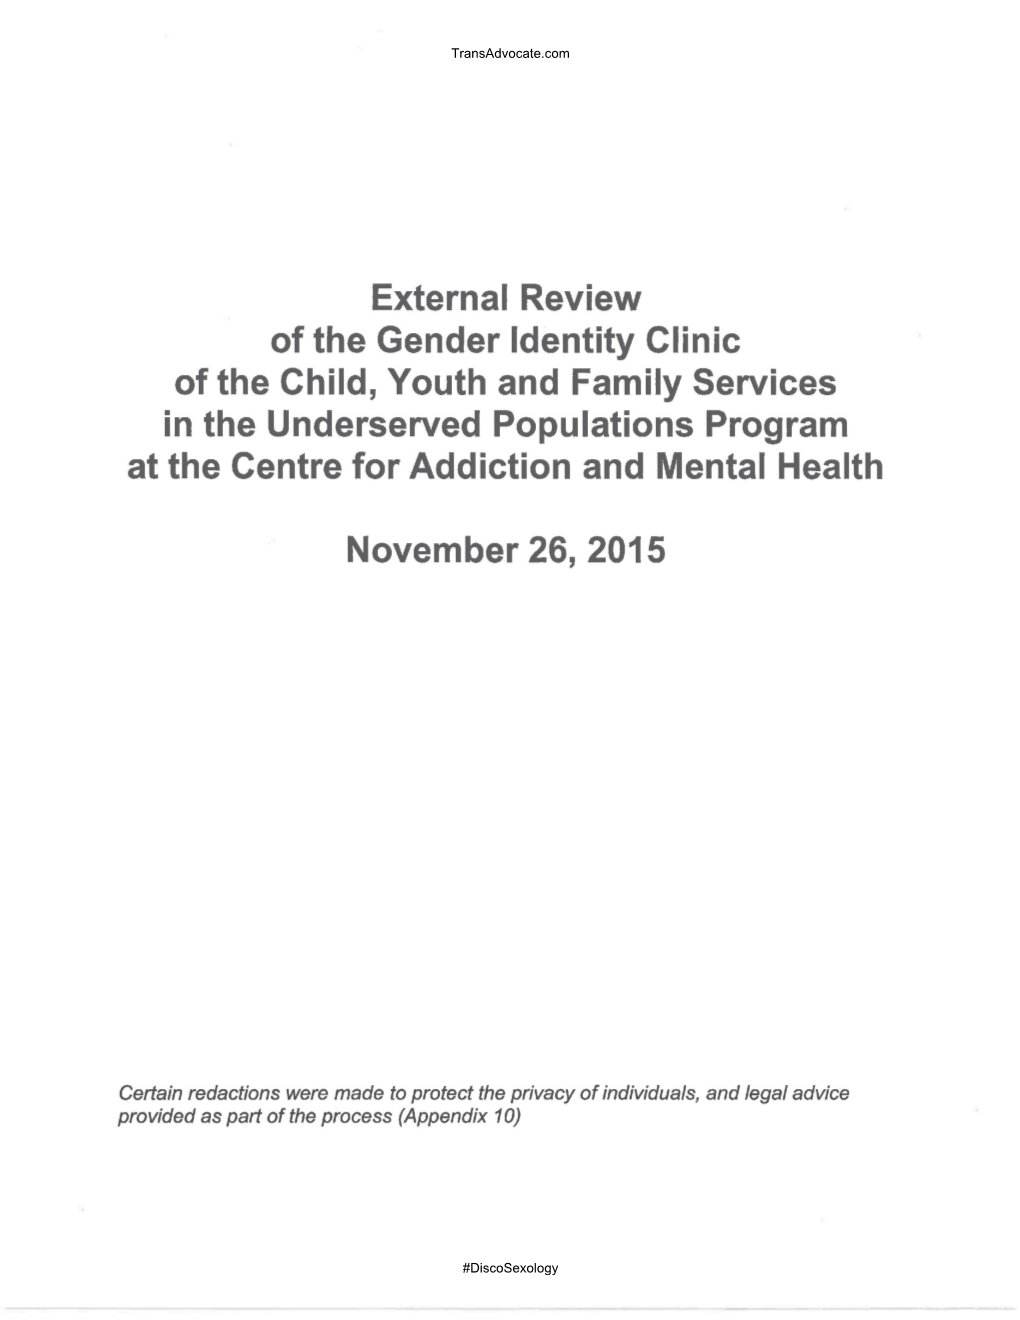 External Review of the Gender Identity Clinic of the Child, Youth and Family Services in the Underserved Populations Program At